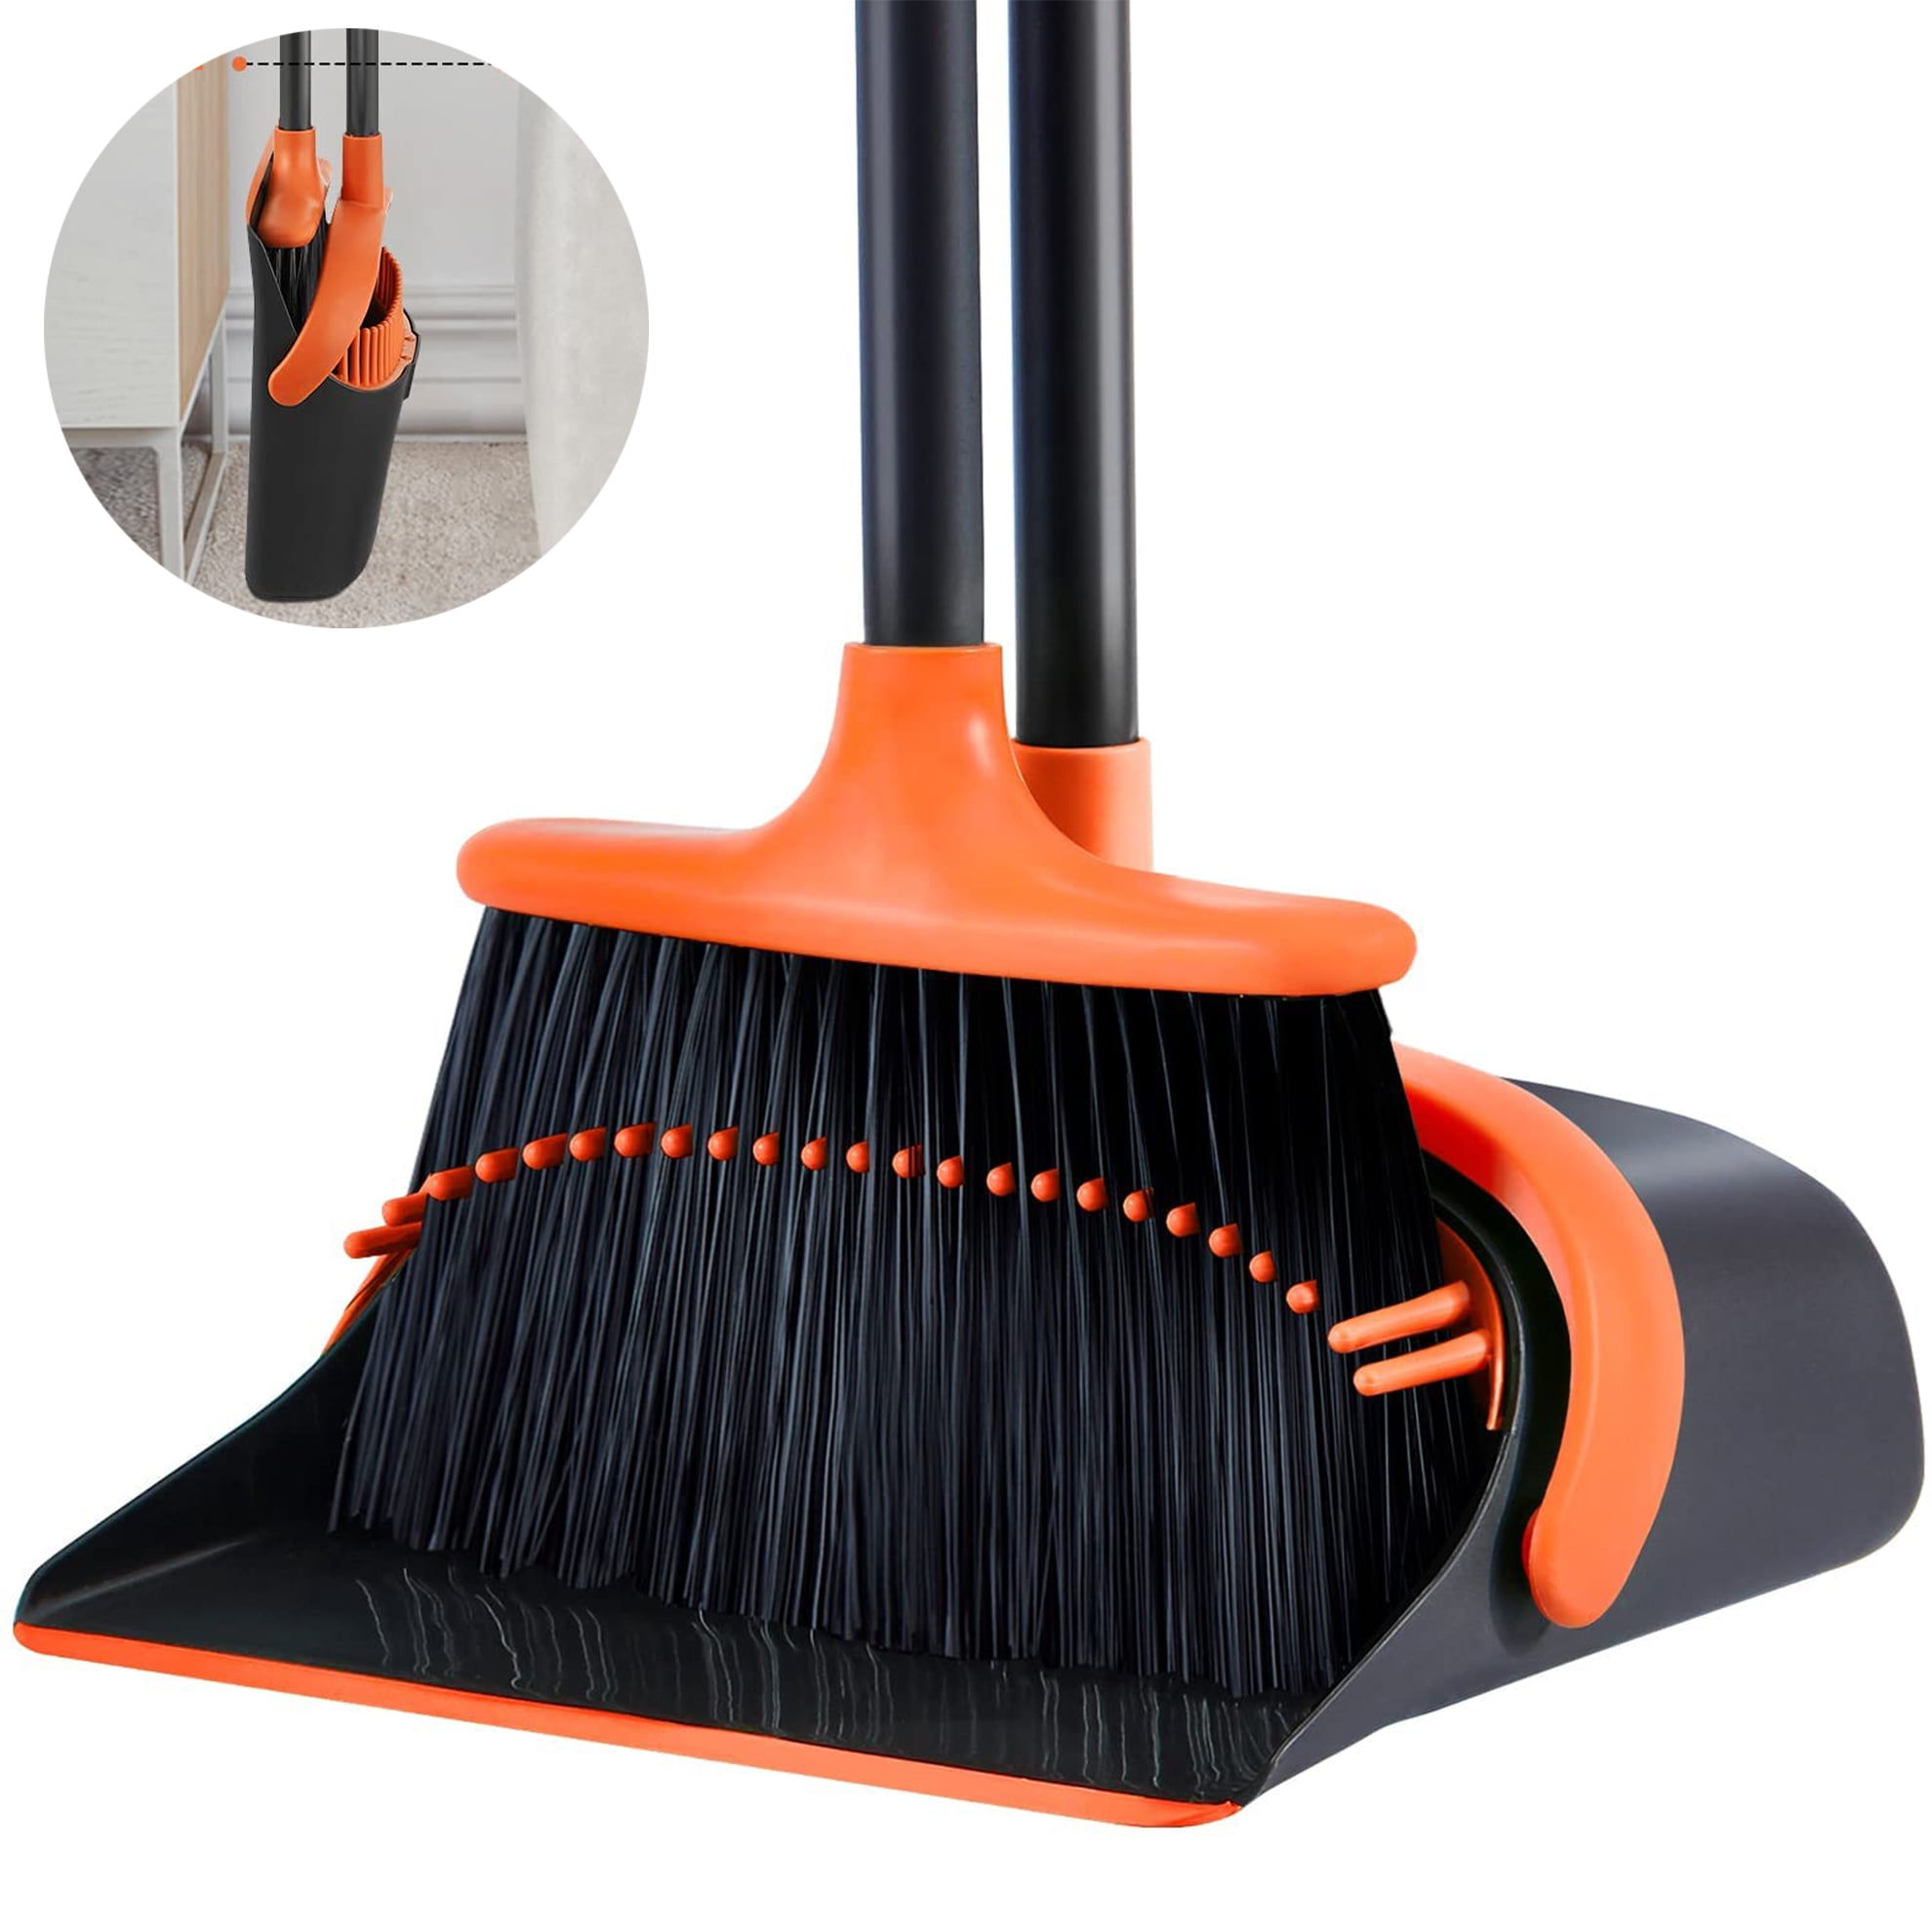 TreeLen Long Handle Broom and Dustpan Set,Upright Dust Pan Combo for Home Room, 